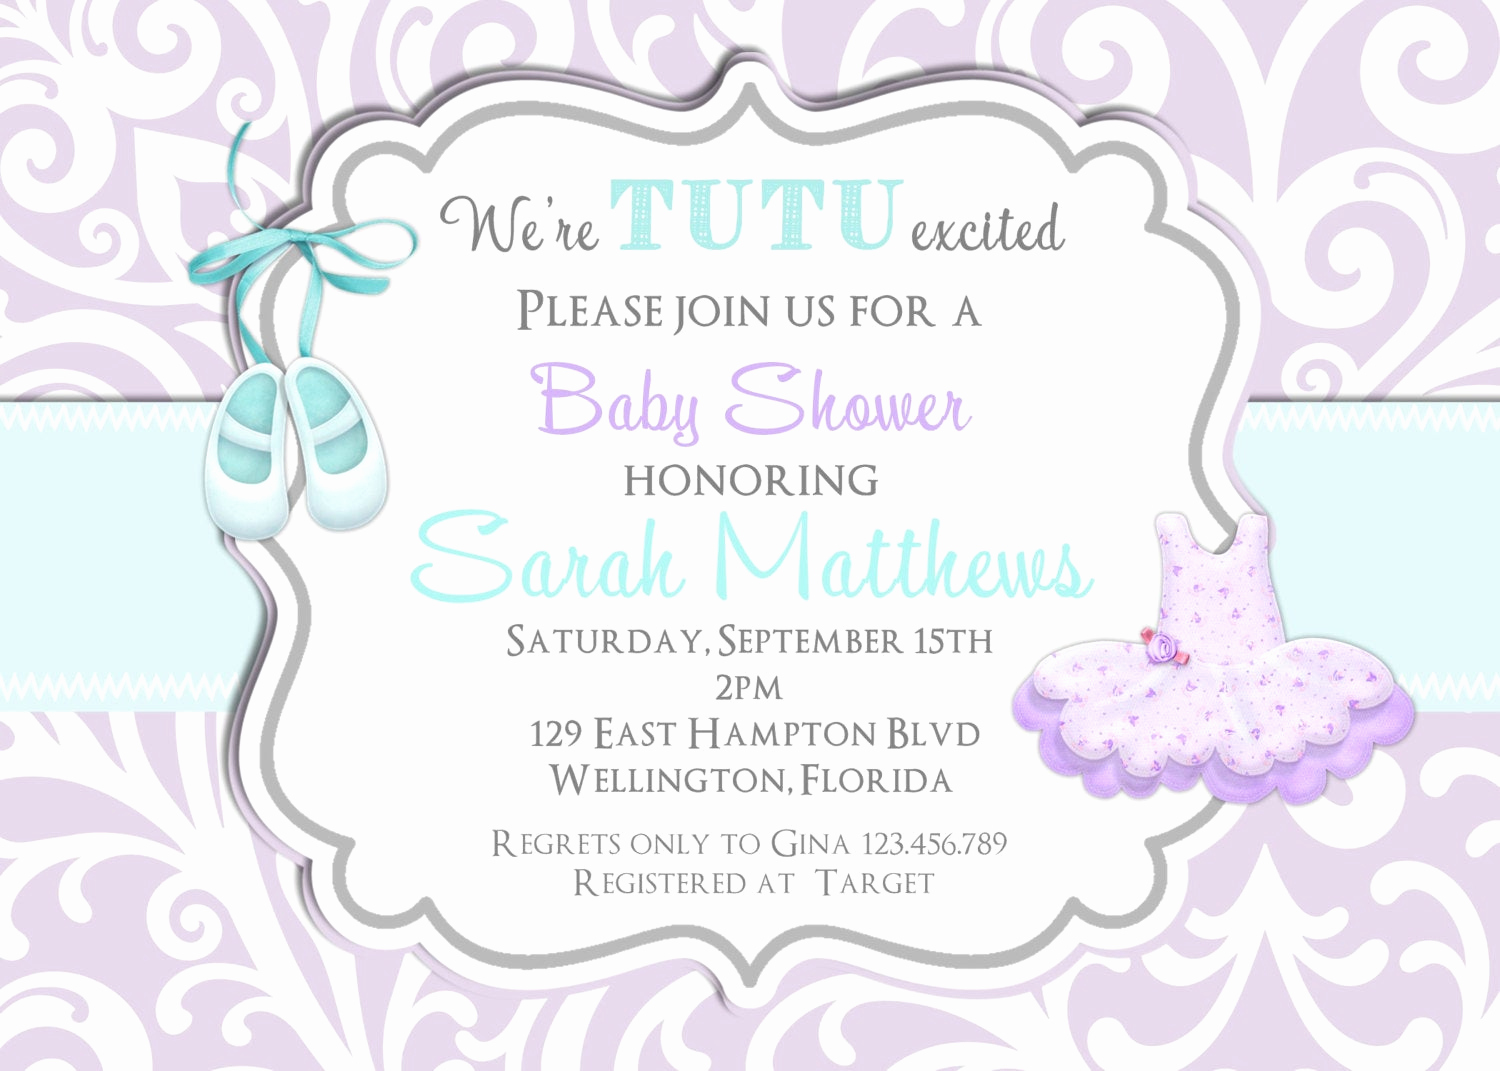 Cute Baby Shower Invitation Ideas Inspirational Tutu Cute Baby Shower Invitation Ballerina Bkue and Lavender